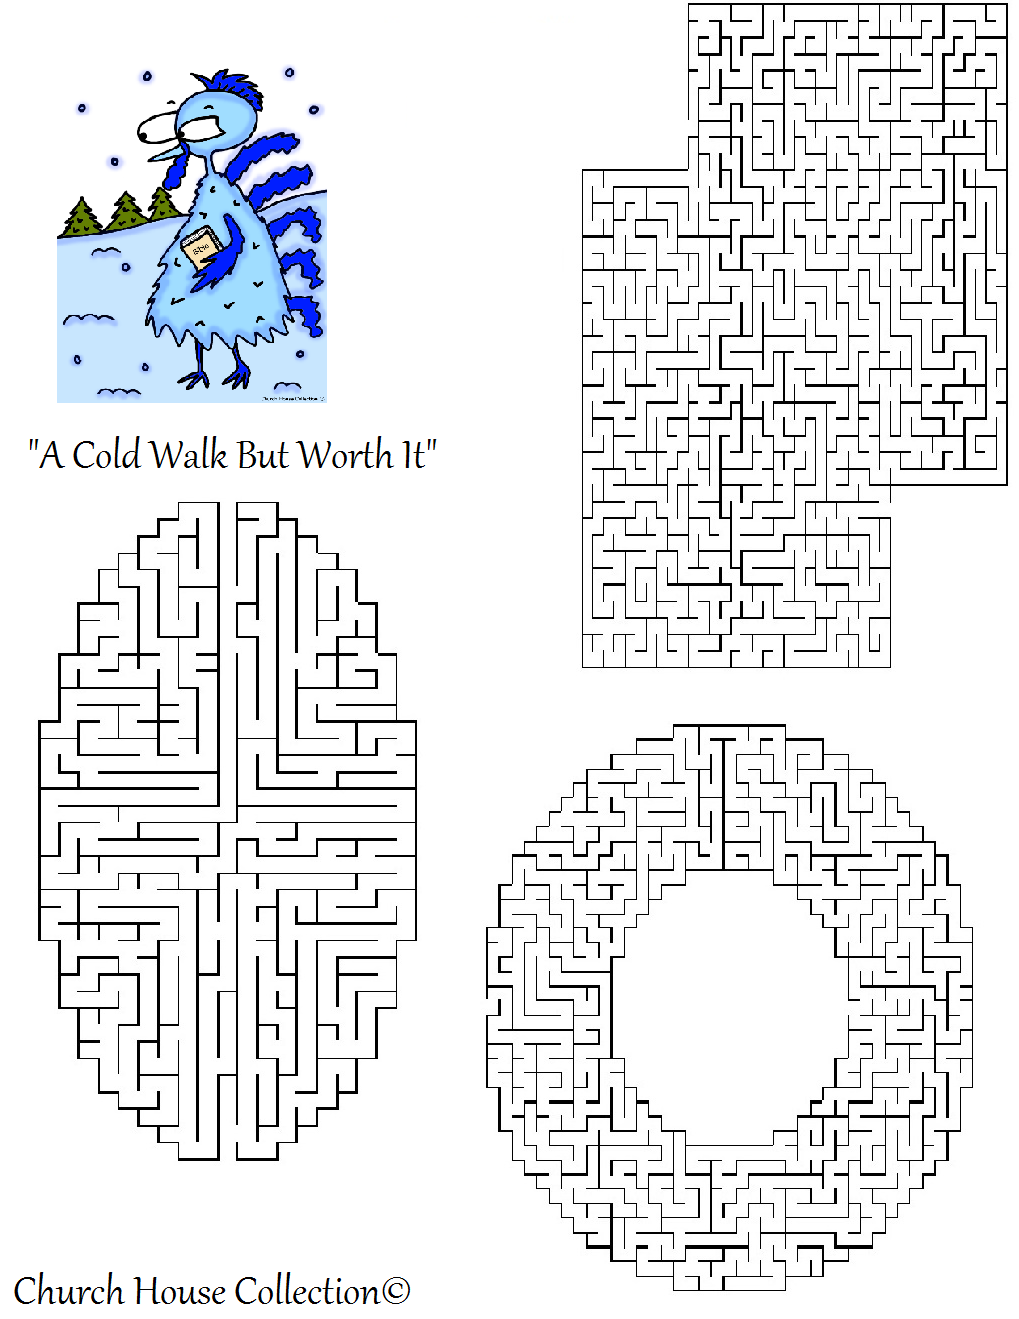 Free Printable Turkey Thanksgiving Mazes For School Kids by Church House Collection